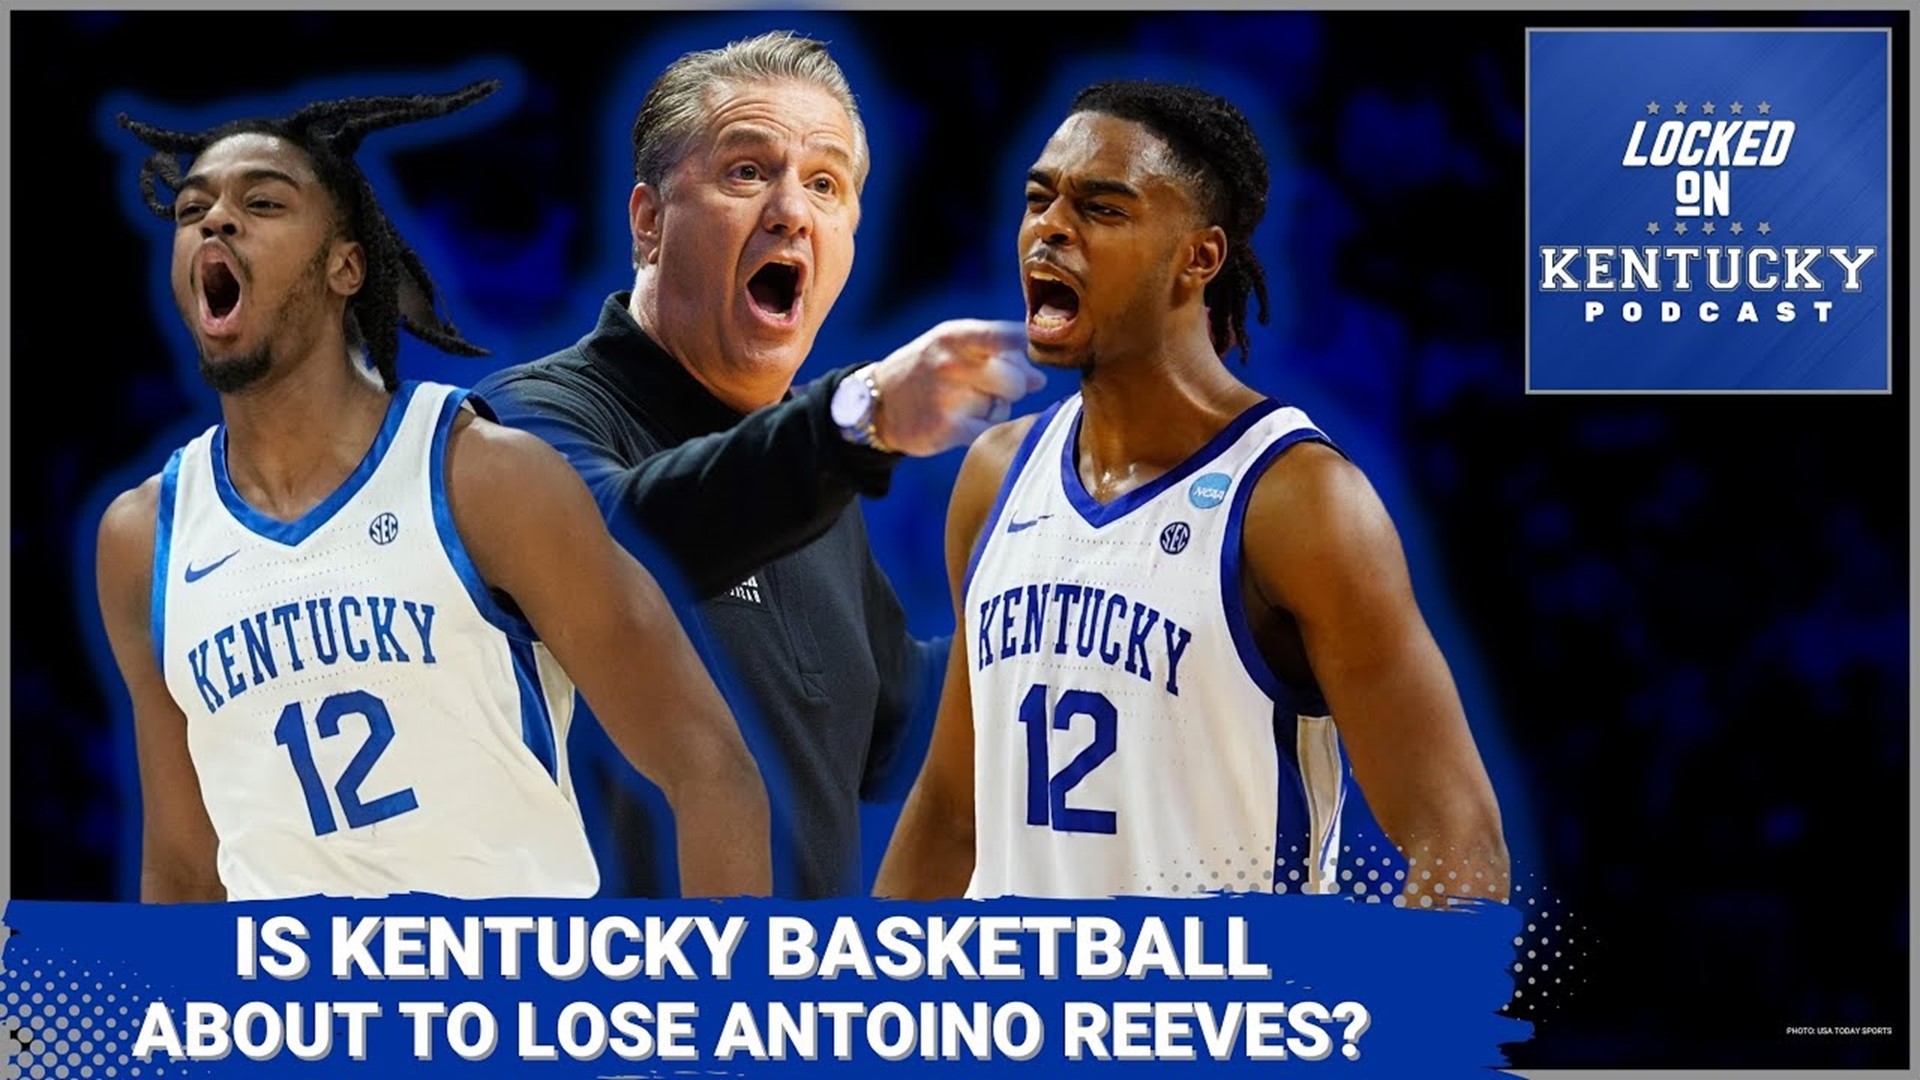 There are rumors out there that Kentucky basketball may lose Antonio Reeves to the transfer portal if he decided to return to college basketball.